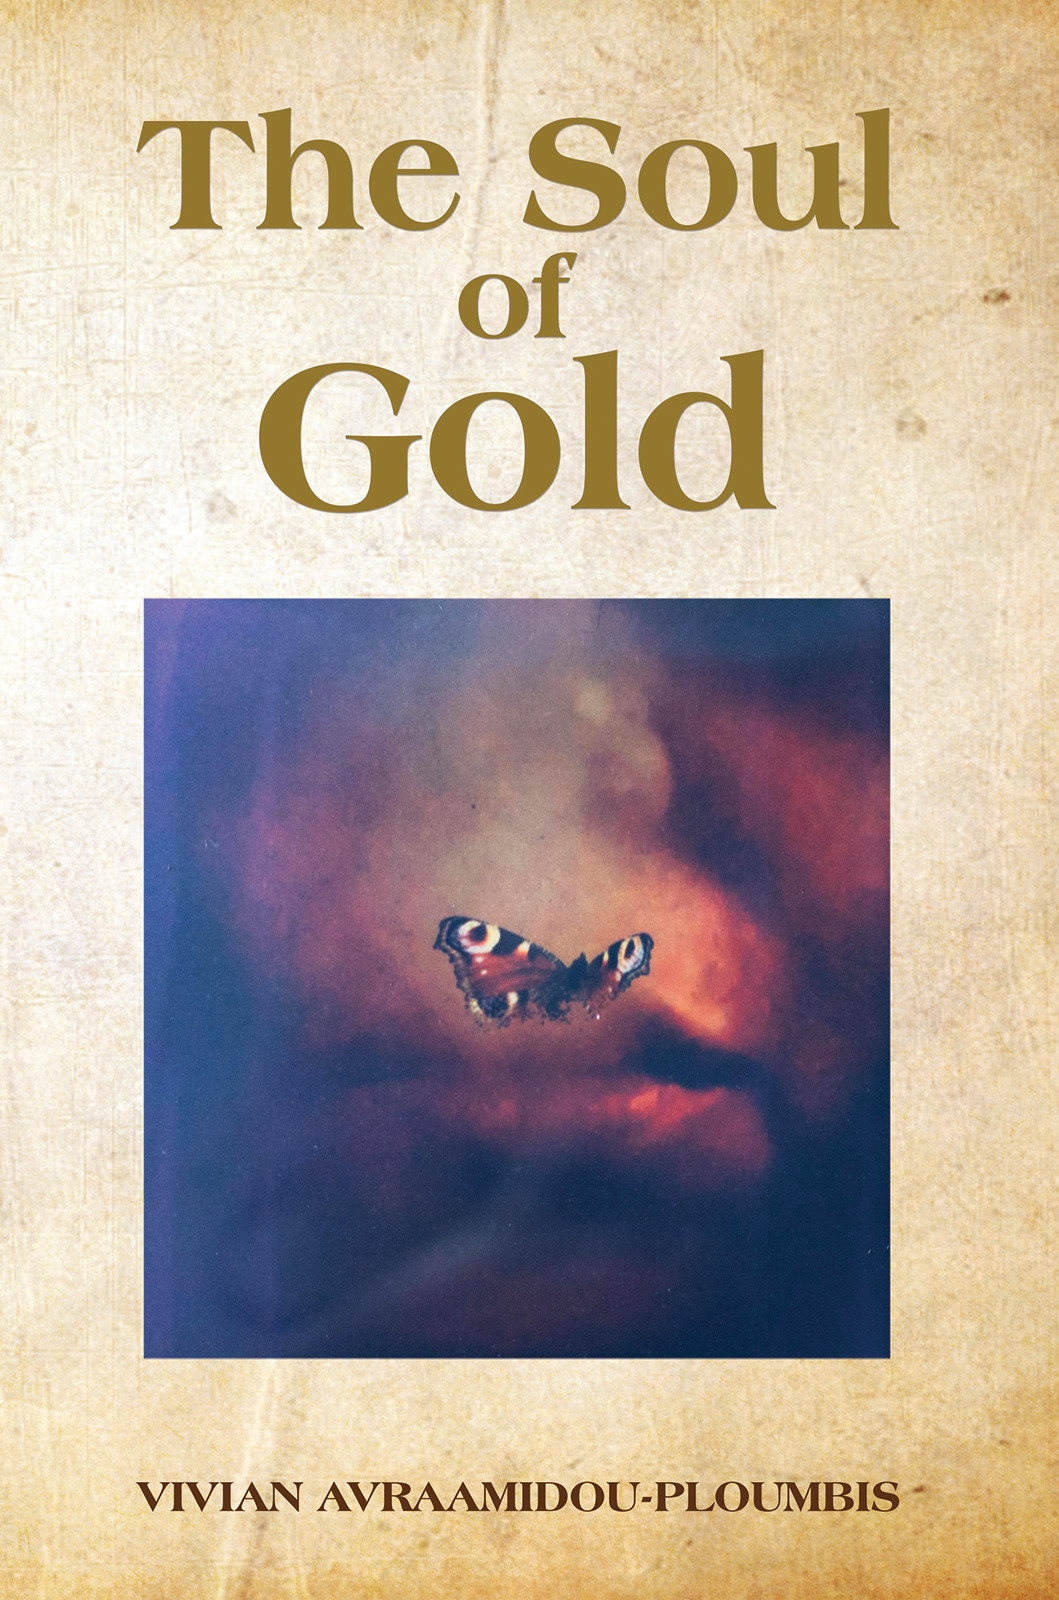 The Soul of Gold